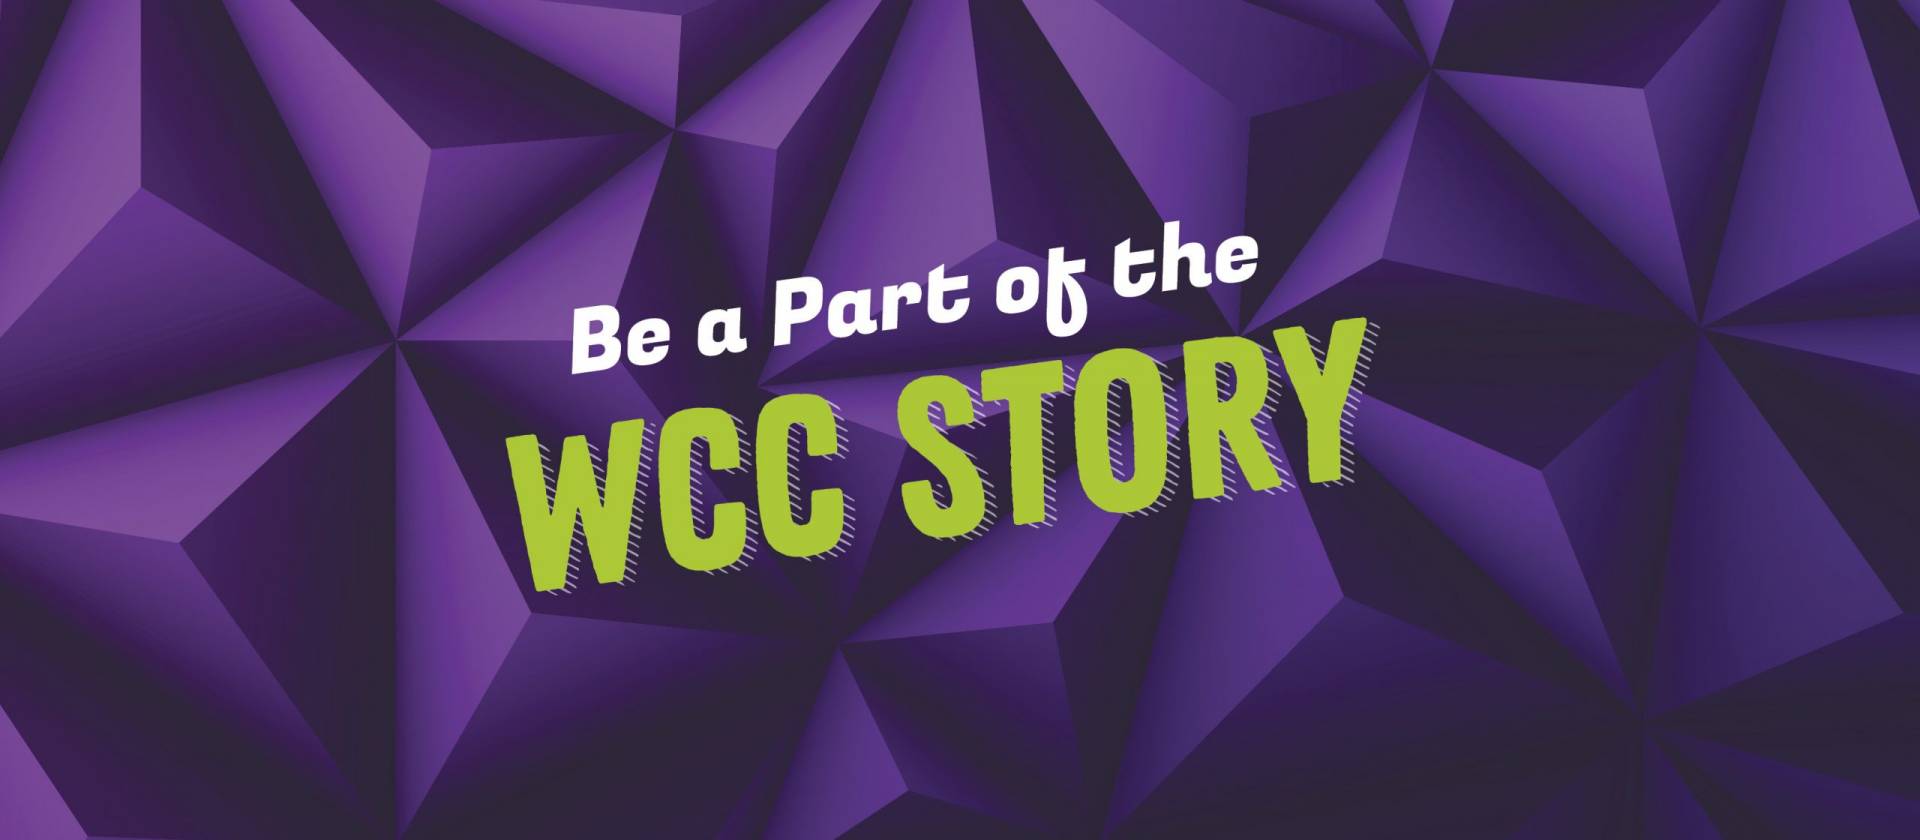 Be a Part of the WCC